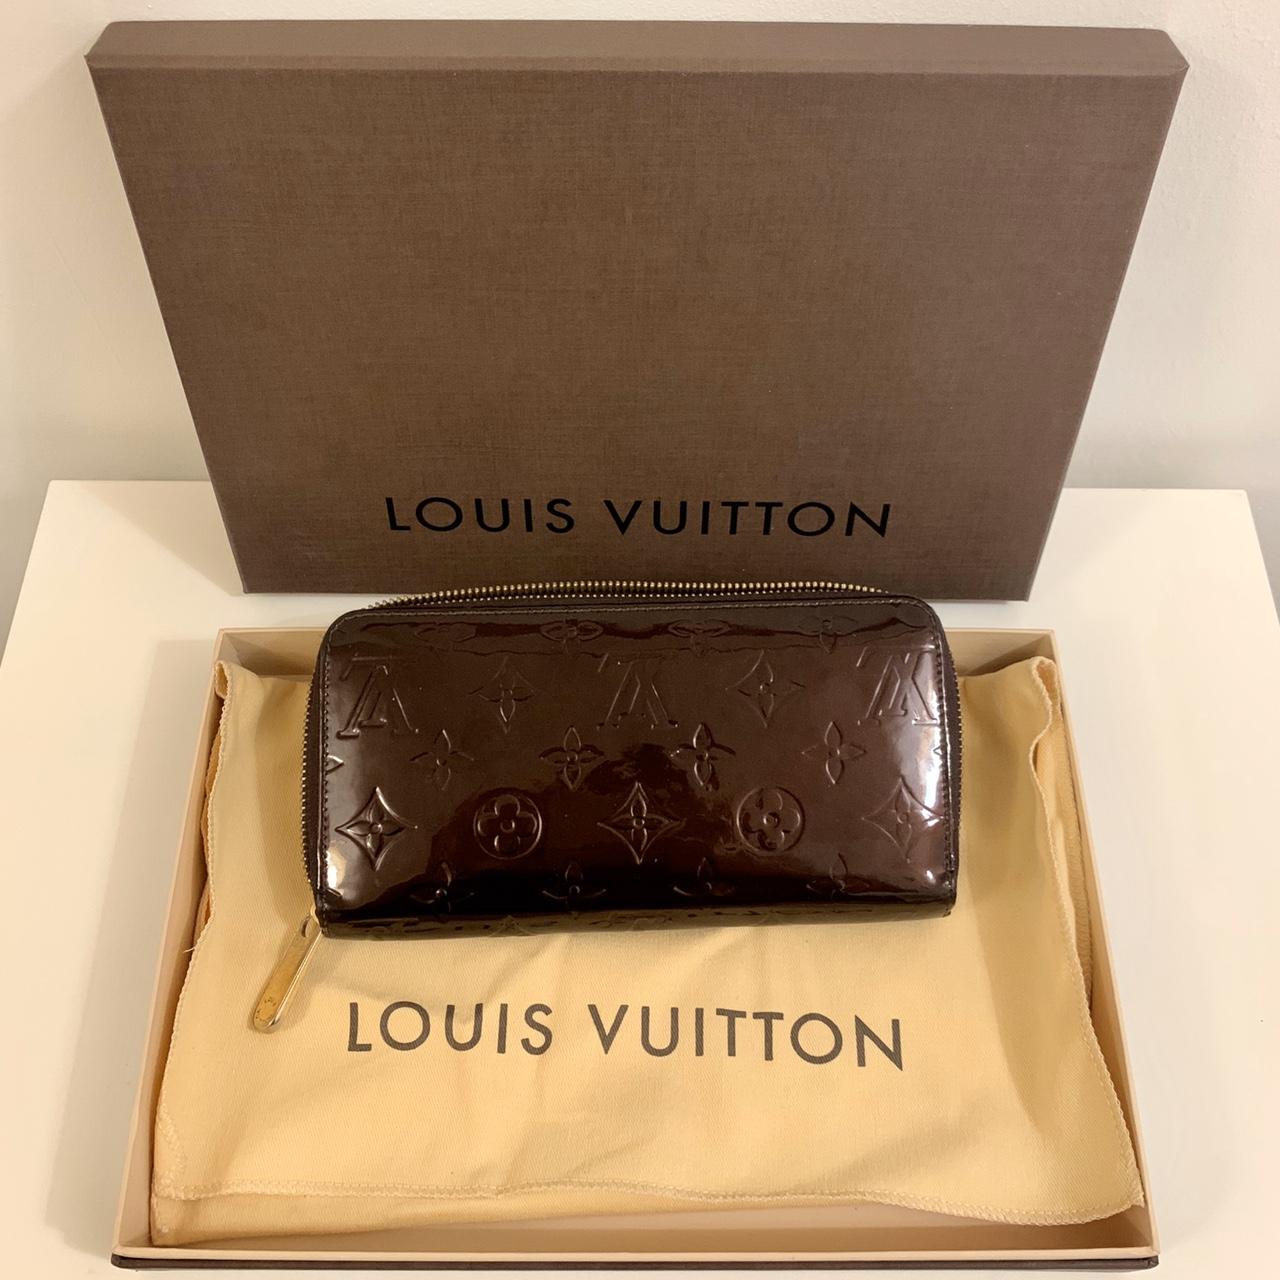 REAL monogrammed Louis Vuitton Zippy wallet! are you - Depop